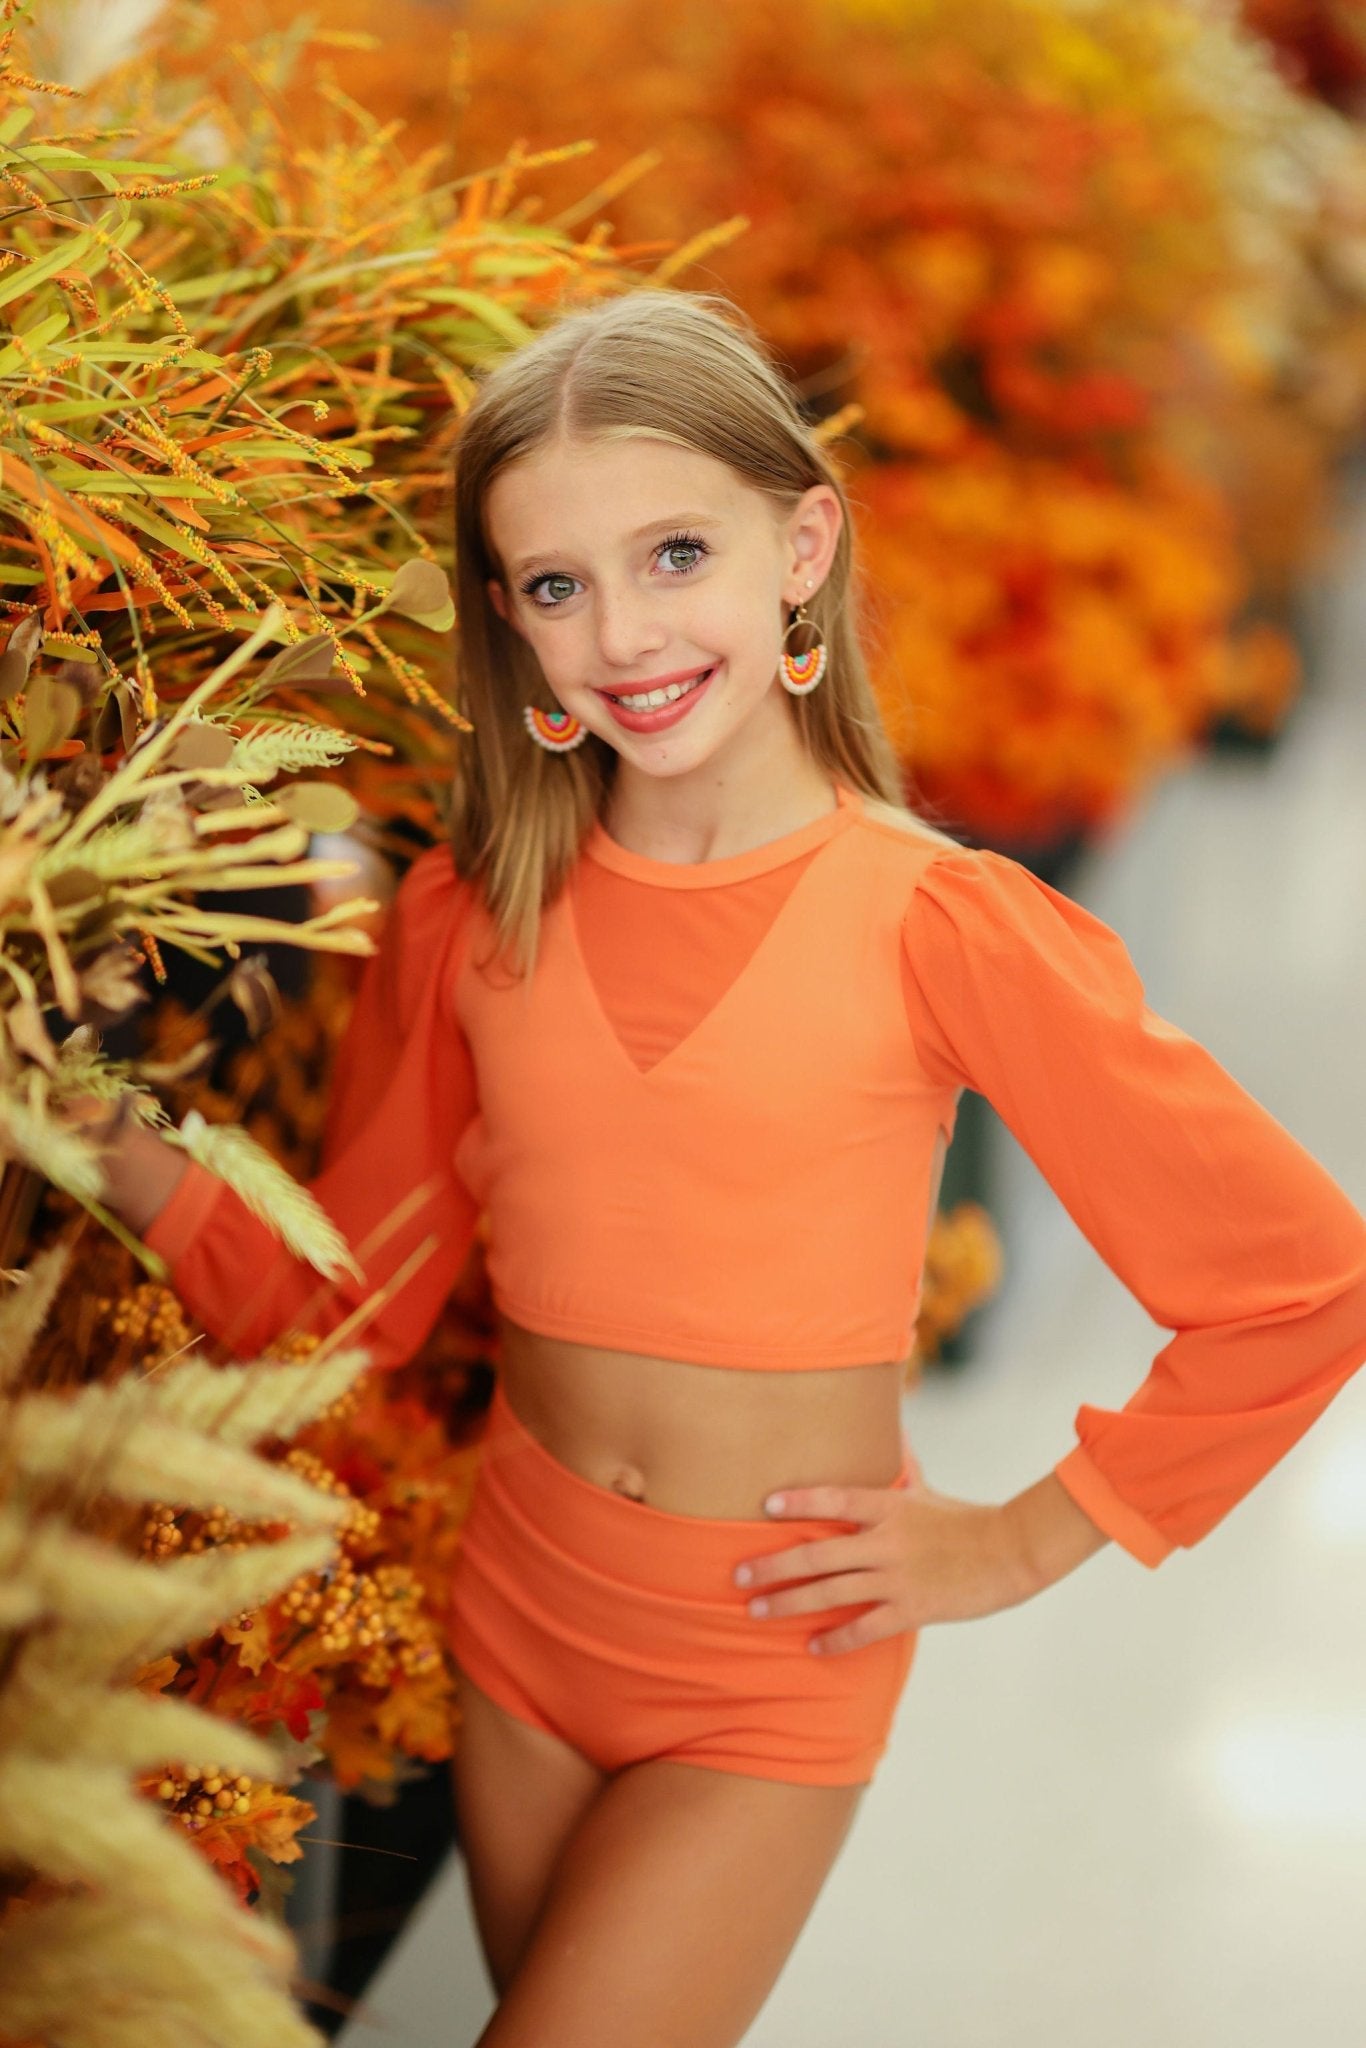 Perfect Poof Pumpkin Spice Long Sleeved Two Piece Dance Set - Evie's Closet Clothing